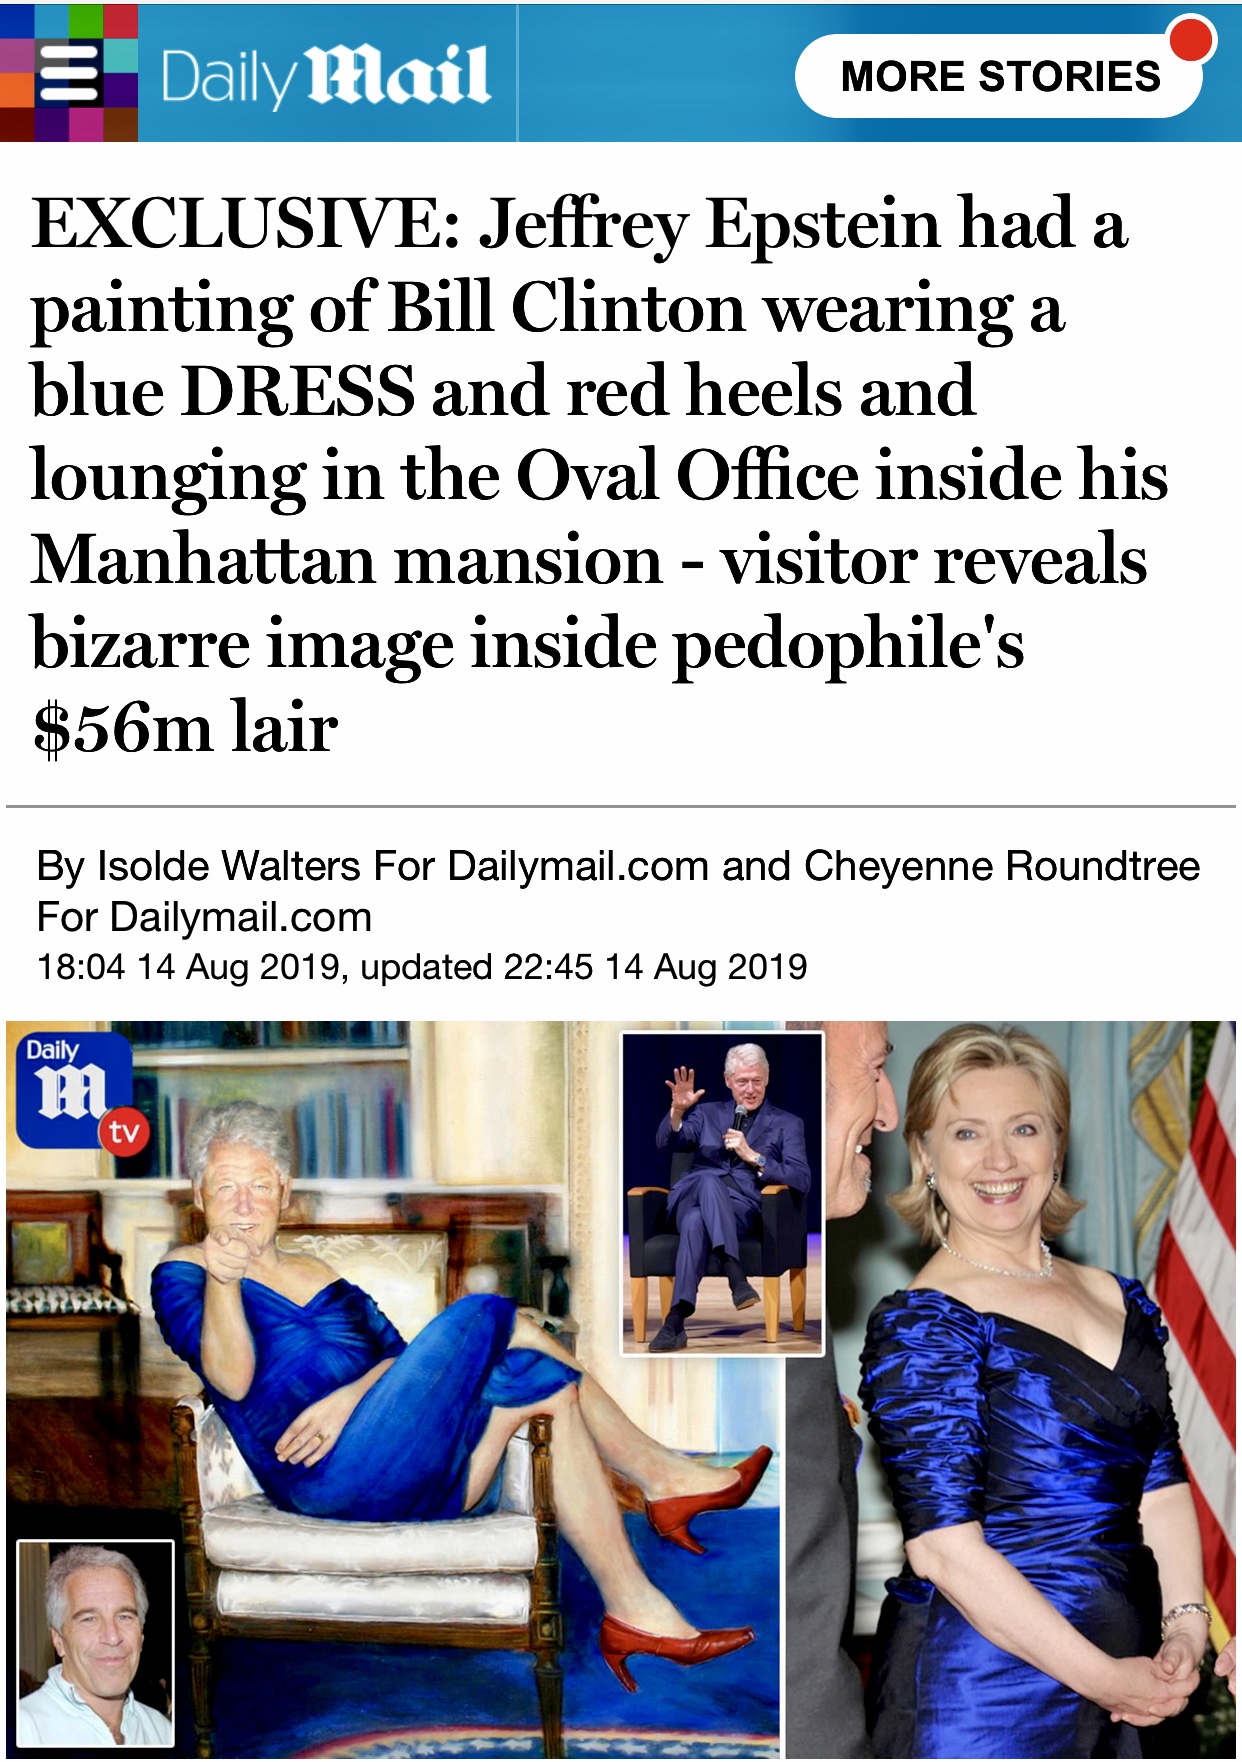 Jeffrey Epstein had a painting of Bill Clinton wearing a blue DRESS and red heels in his home